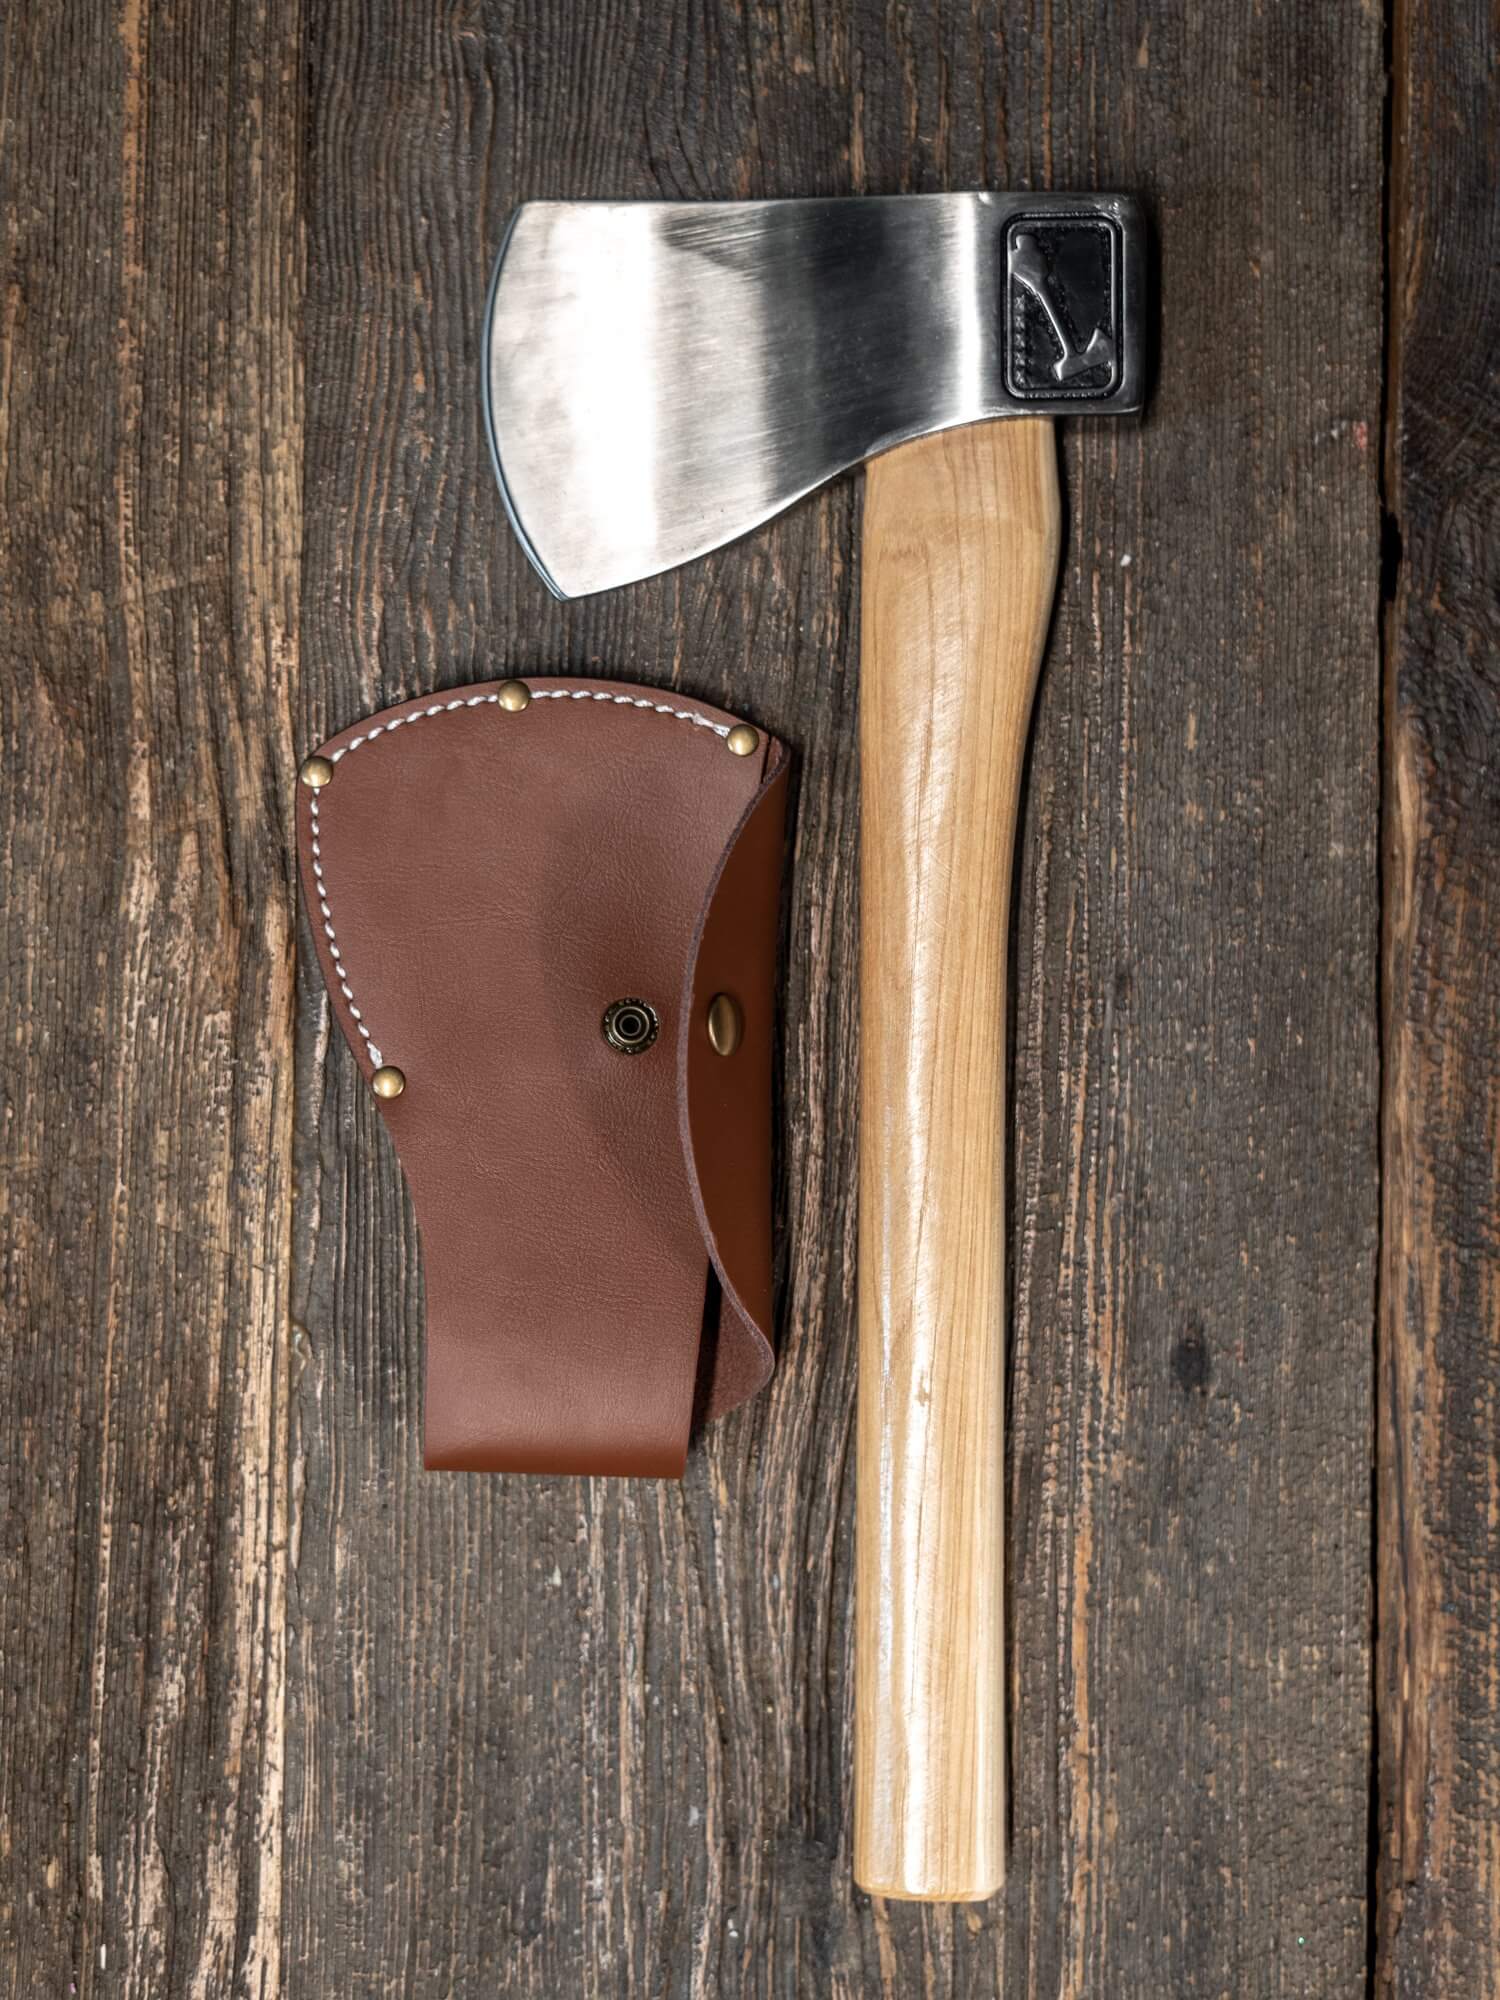 World Axe Throwing League Premium Leather Sheaths With Axe